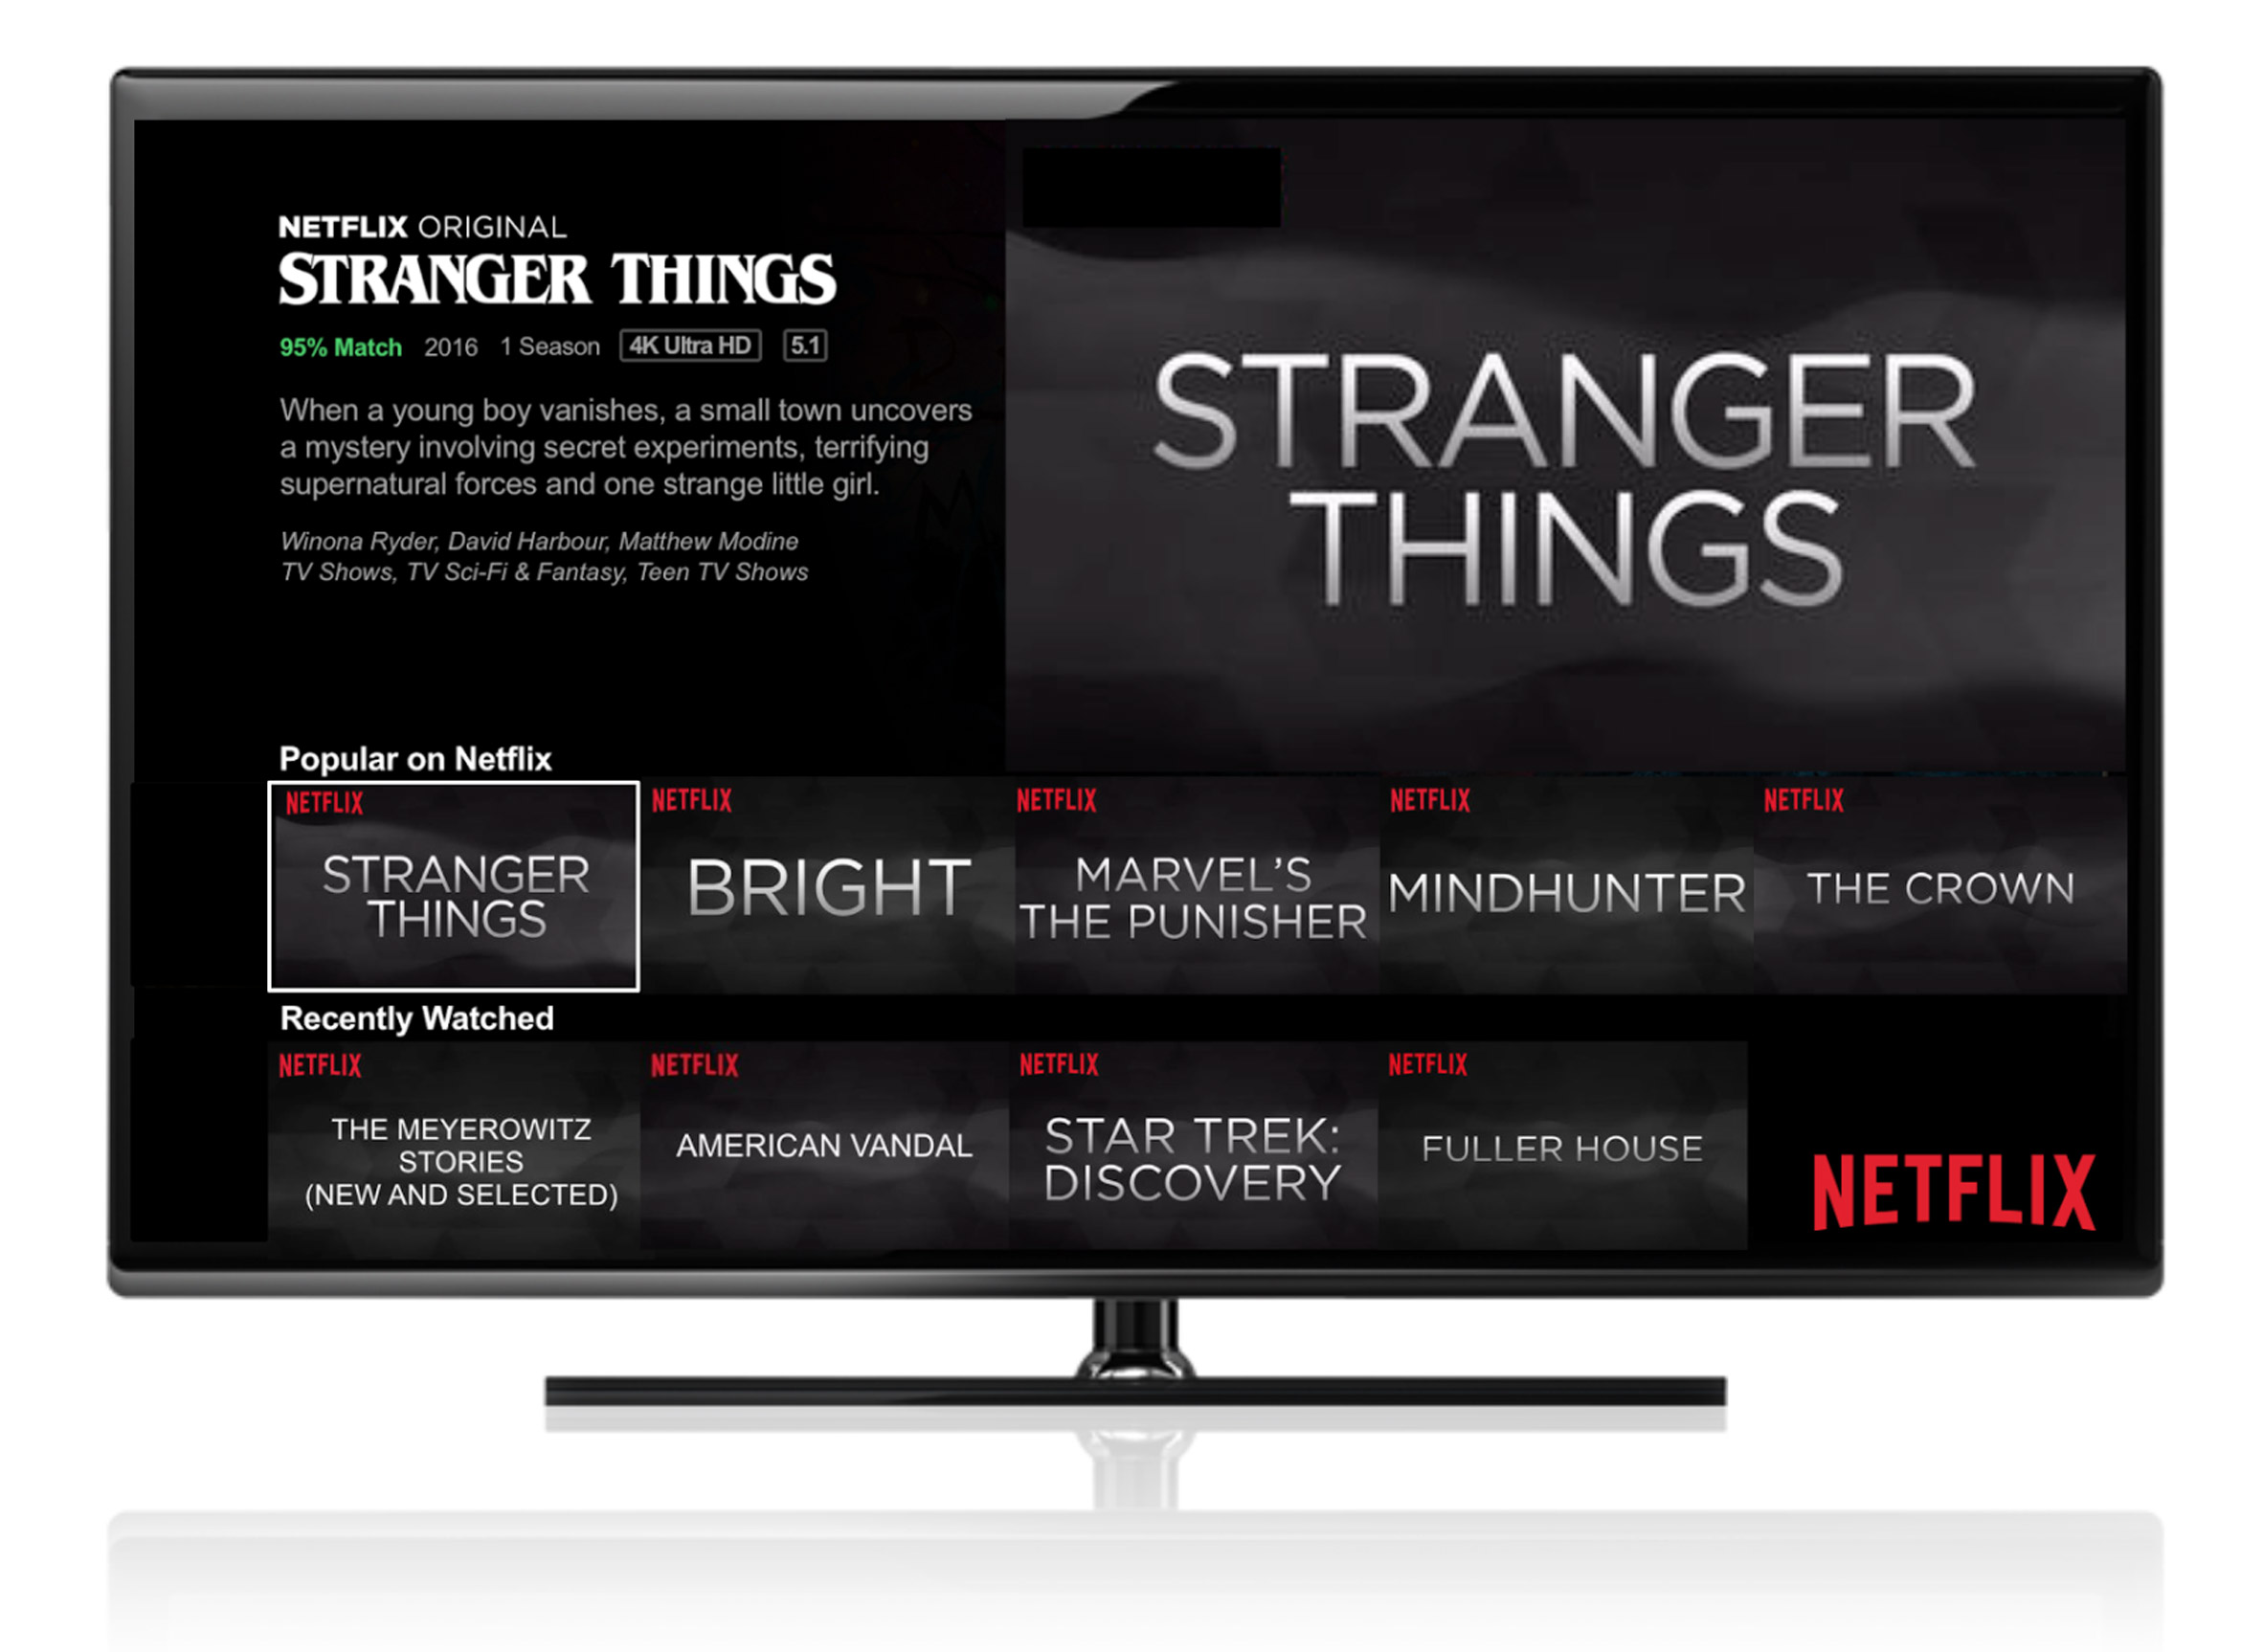 Netflix targets different film artworks to suit users viewing habits